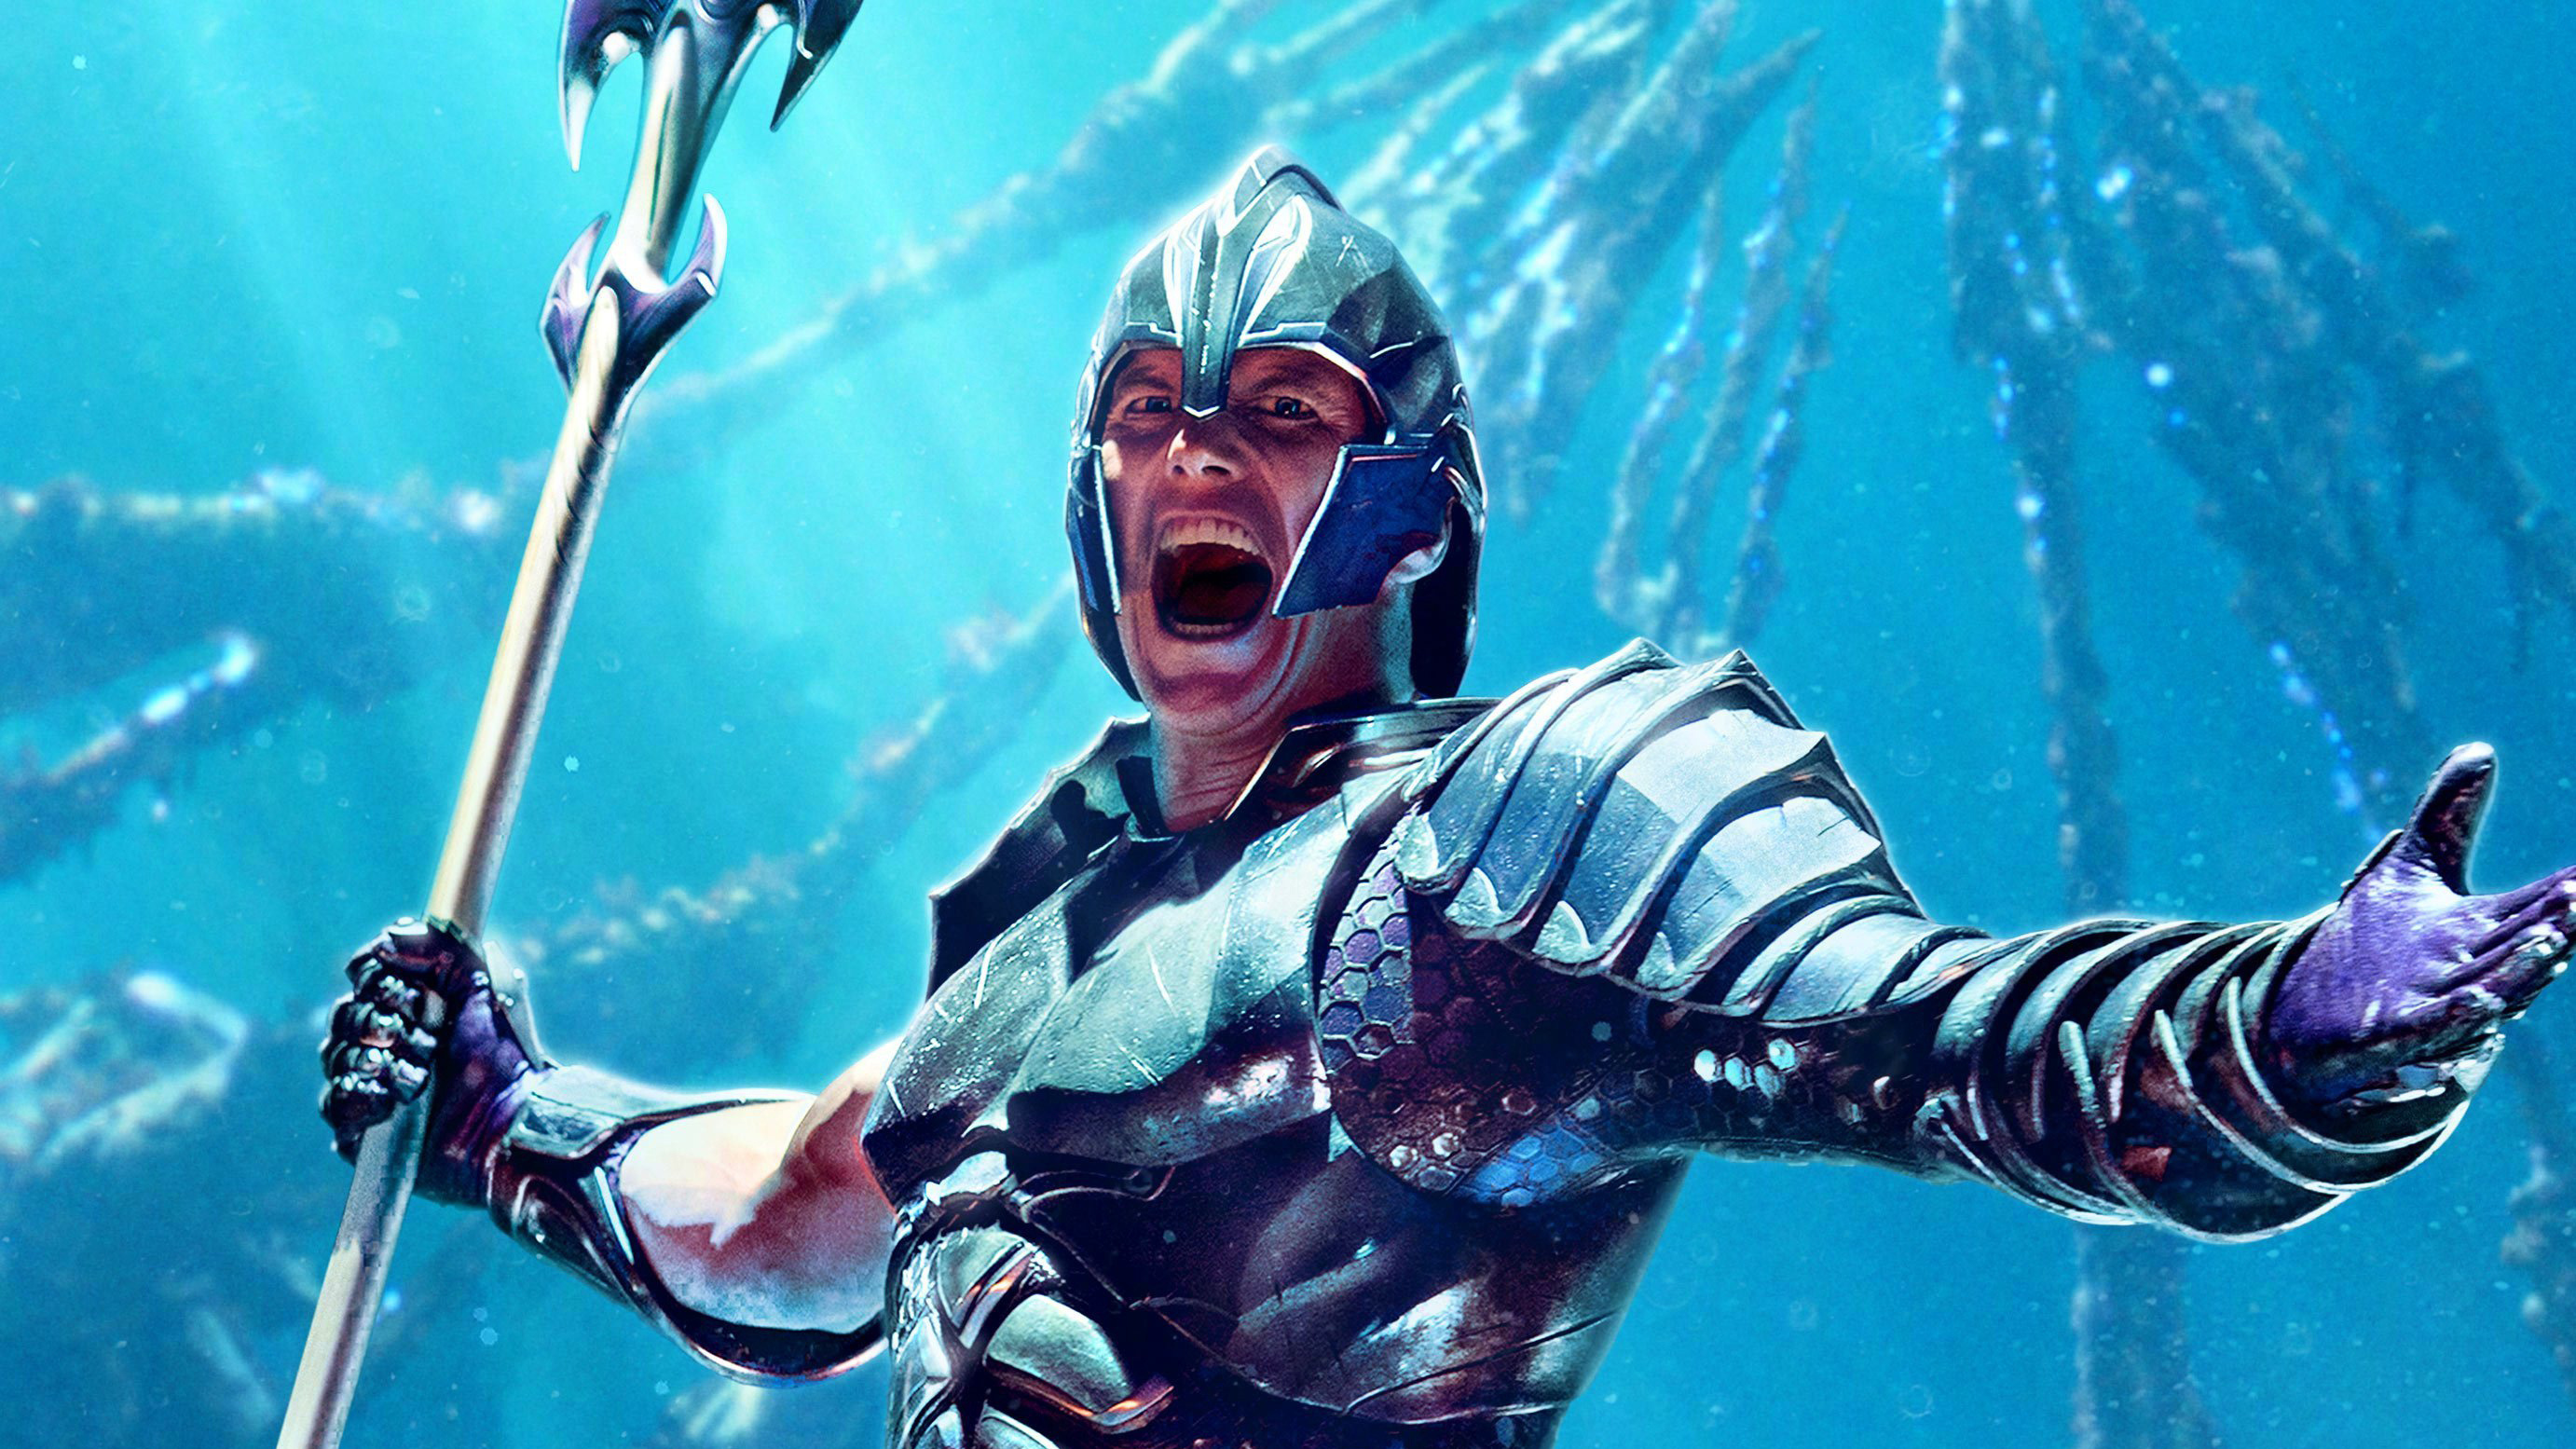 Aquaman King Orm, Movies 4k wallpapers, Images backgrounds, Photos pictures, 2770x1560 HD Desktop